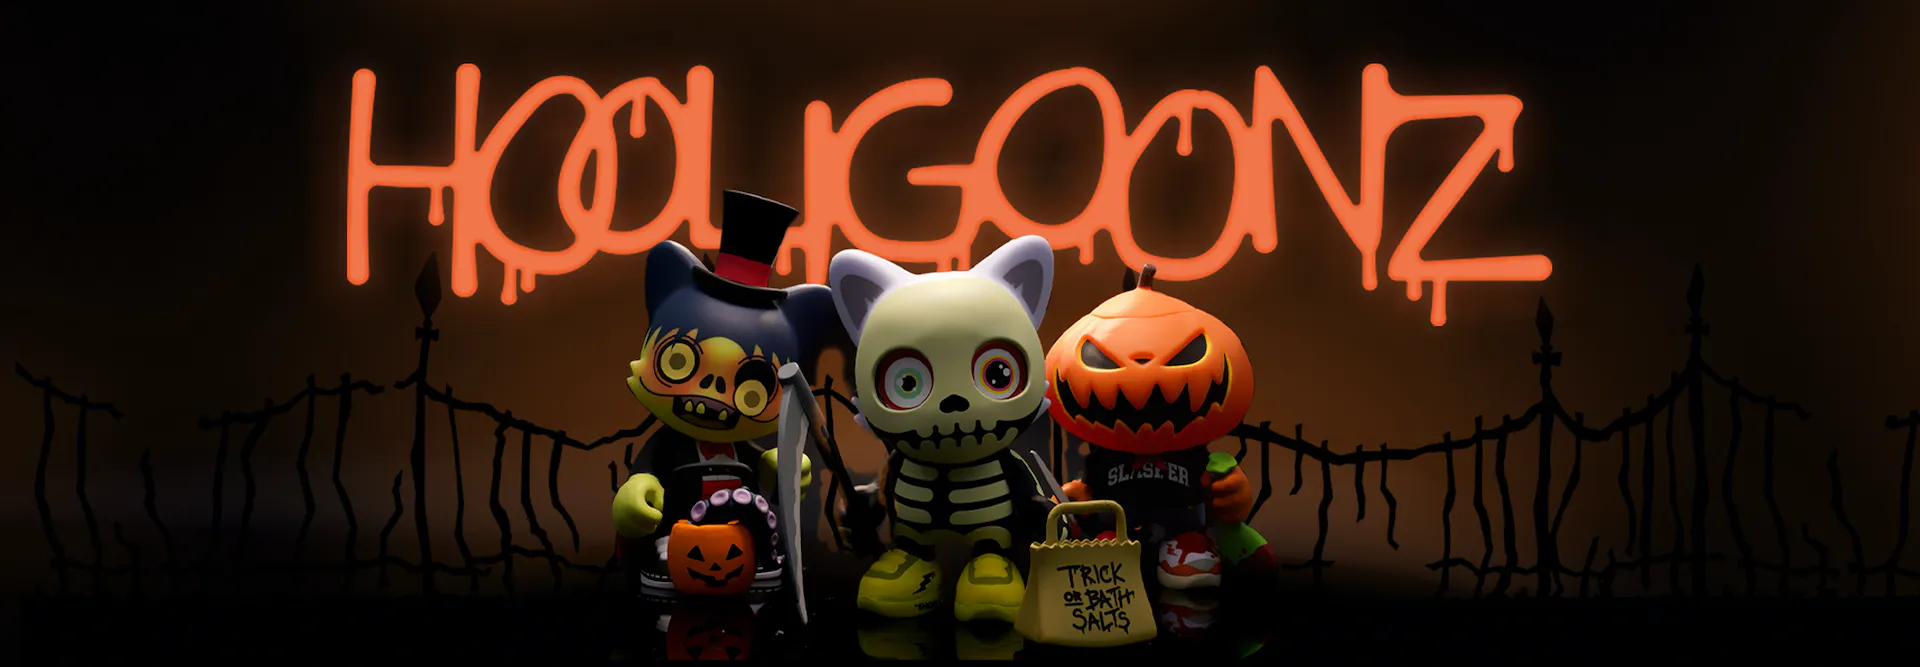 Featured image for “Superplastic’s Holiday-Exclusive Hooligoonz Figures By Janky Are Perfectly Spooky”